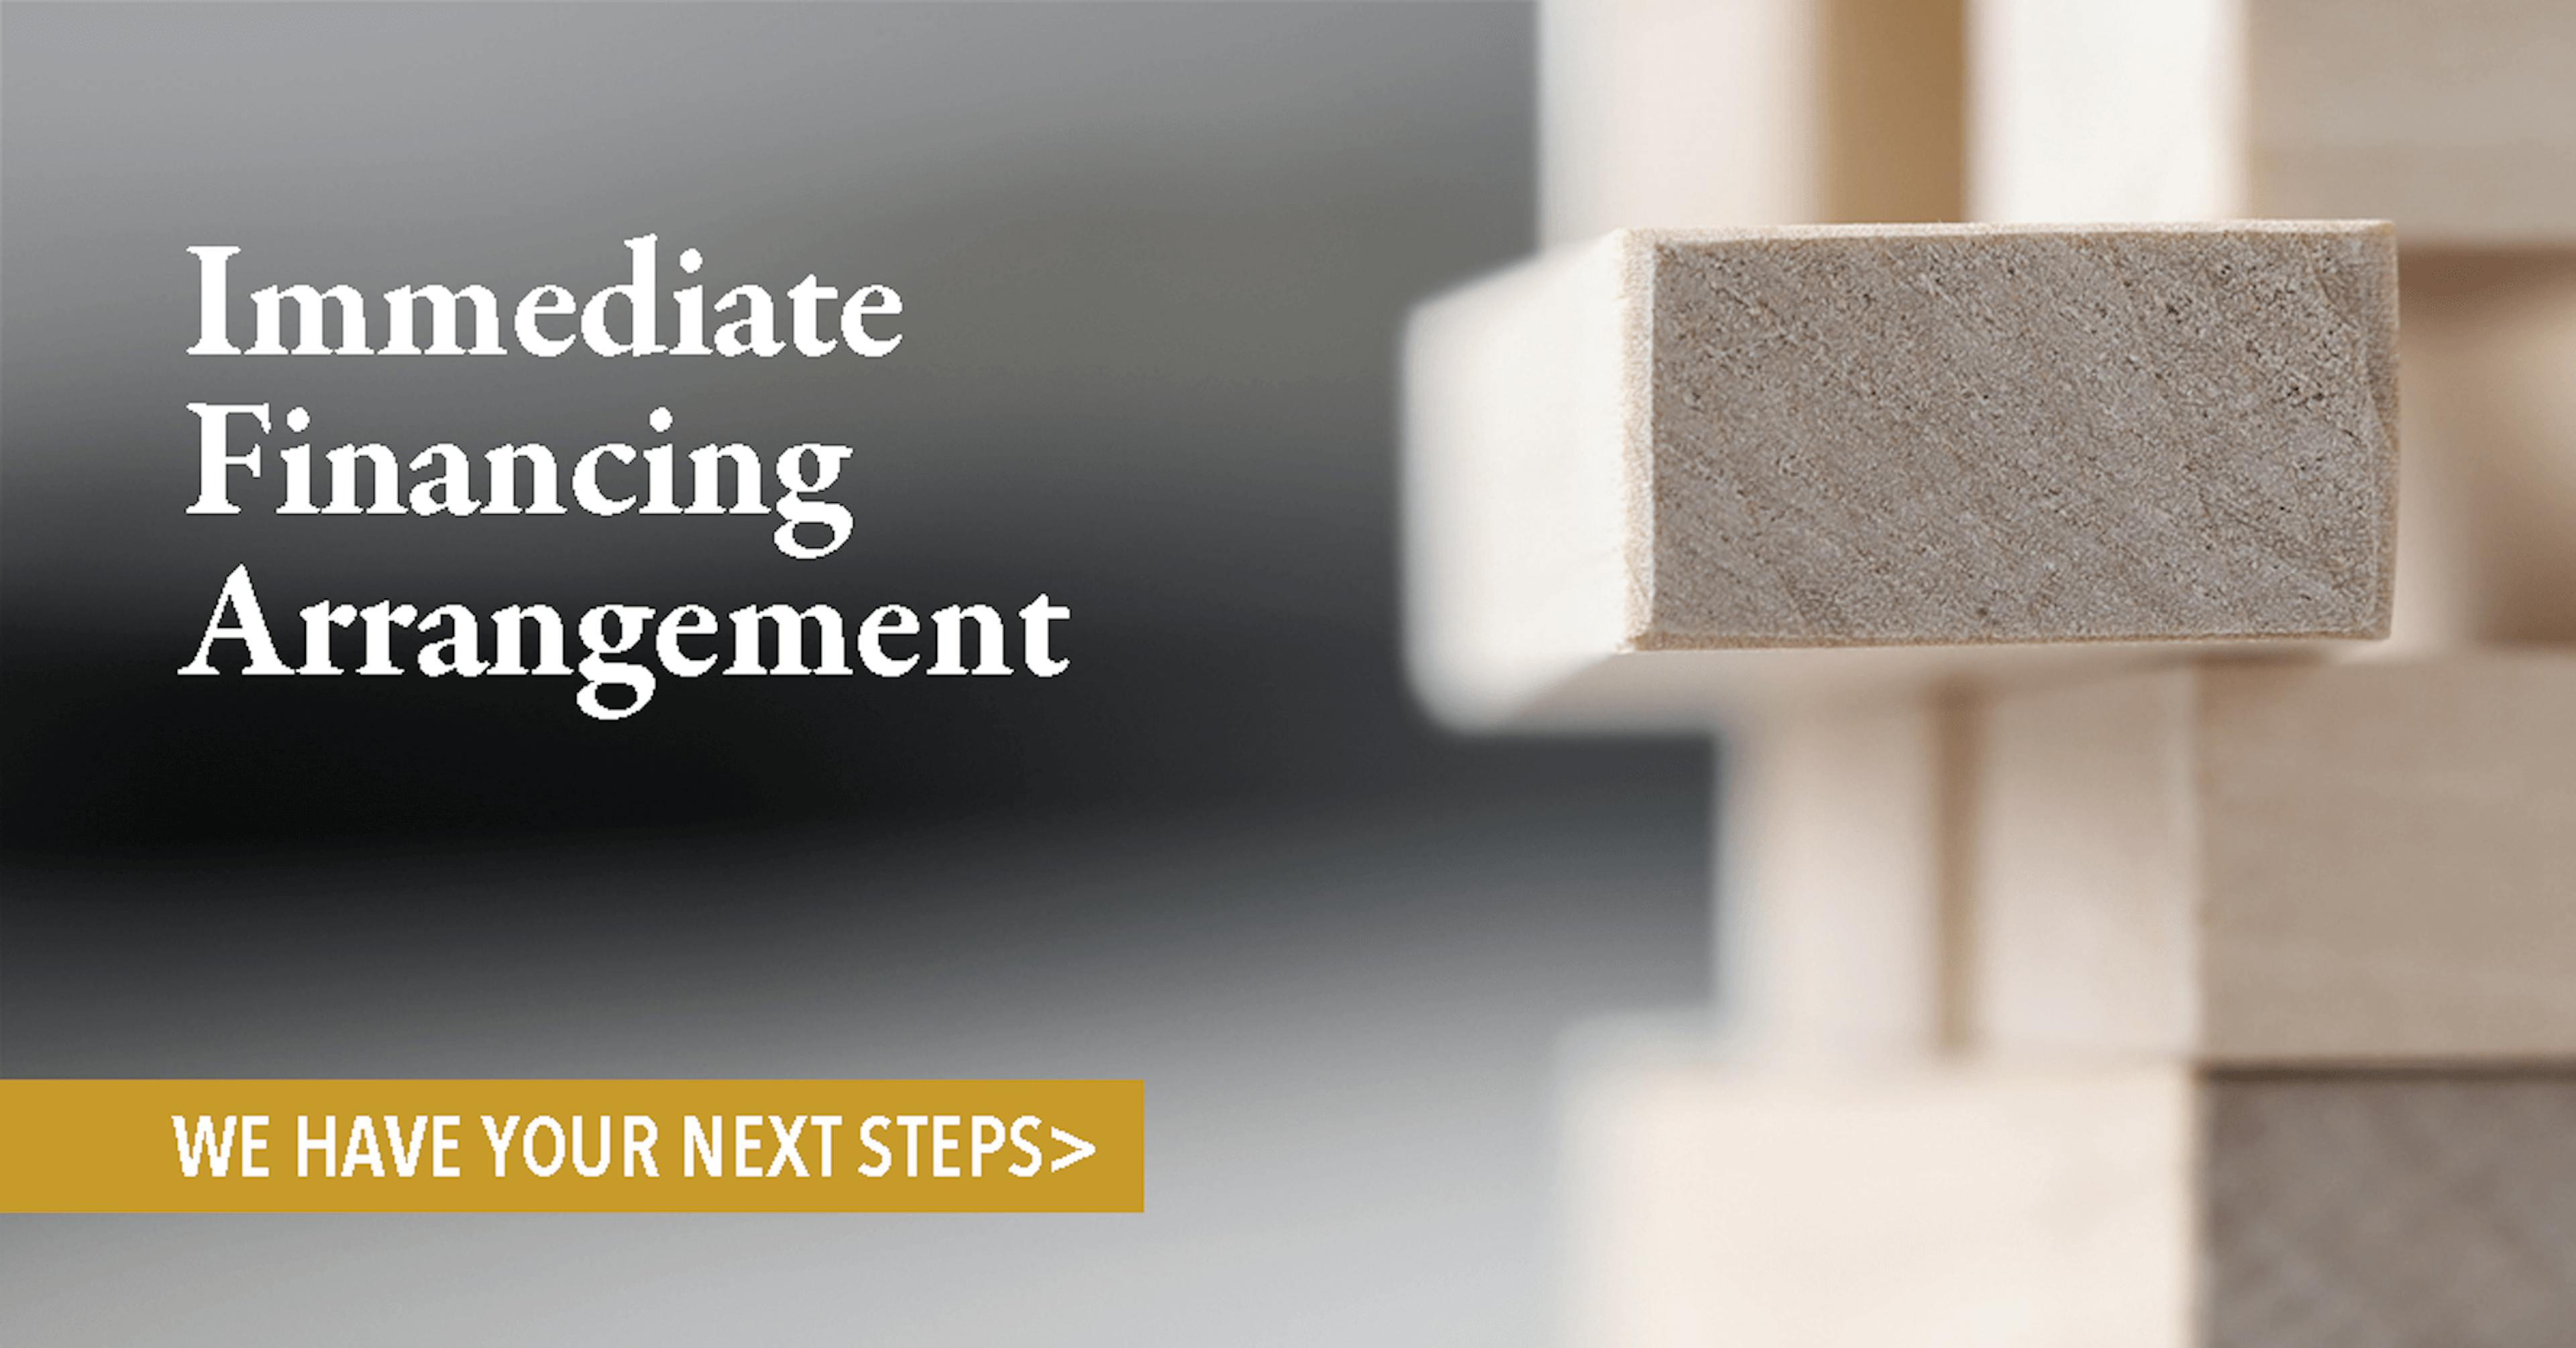 A close-up photo of Jenga blocks, with text to the left reading 'Immediate Financing Arrangement: we have your next steps'.